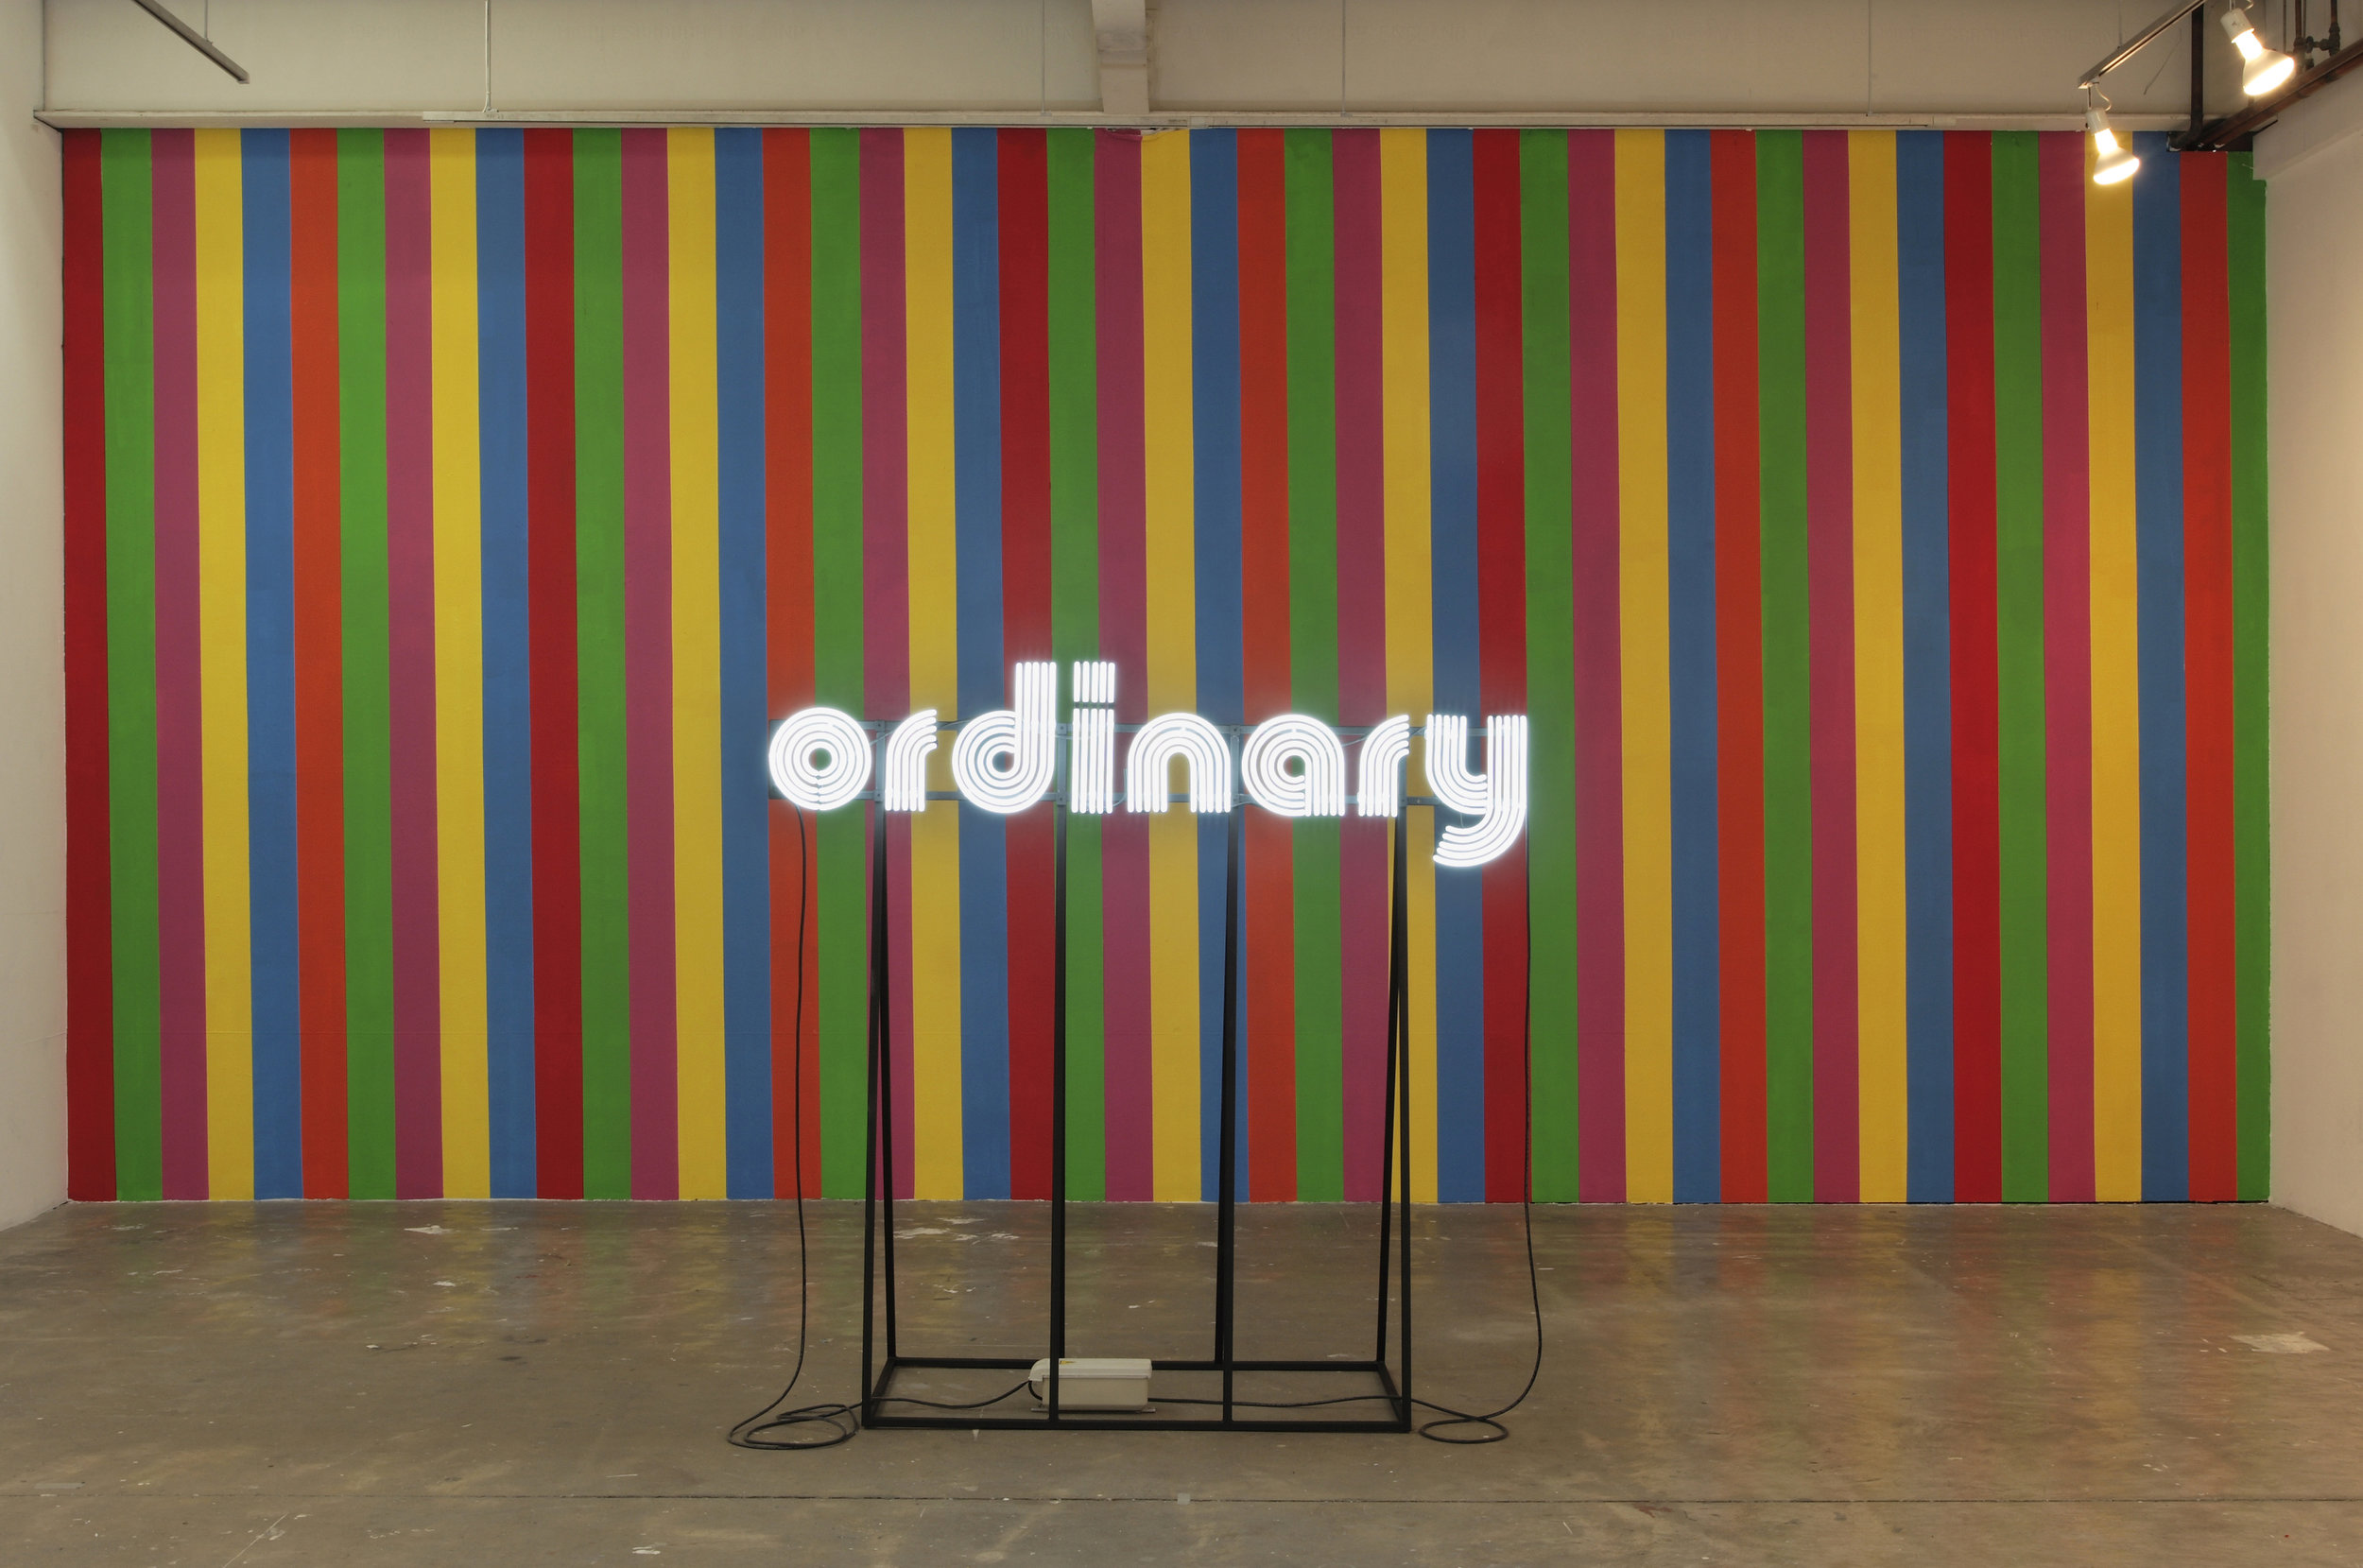  Kristin McIver  Lifeless lll , 2009 neon and steel, synthetic polymer paint (neon stand and wall) 67 x 68 x 28 in (170.2 x 172.7 x 71.1 cm) 